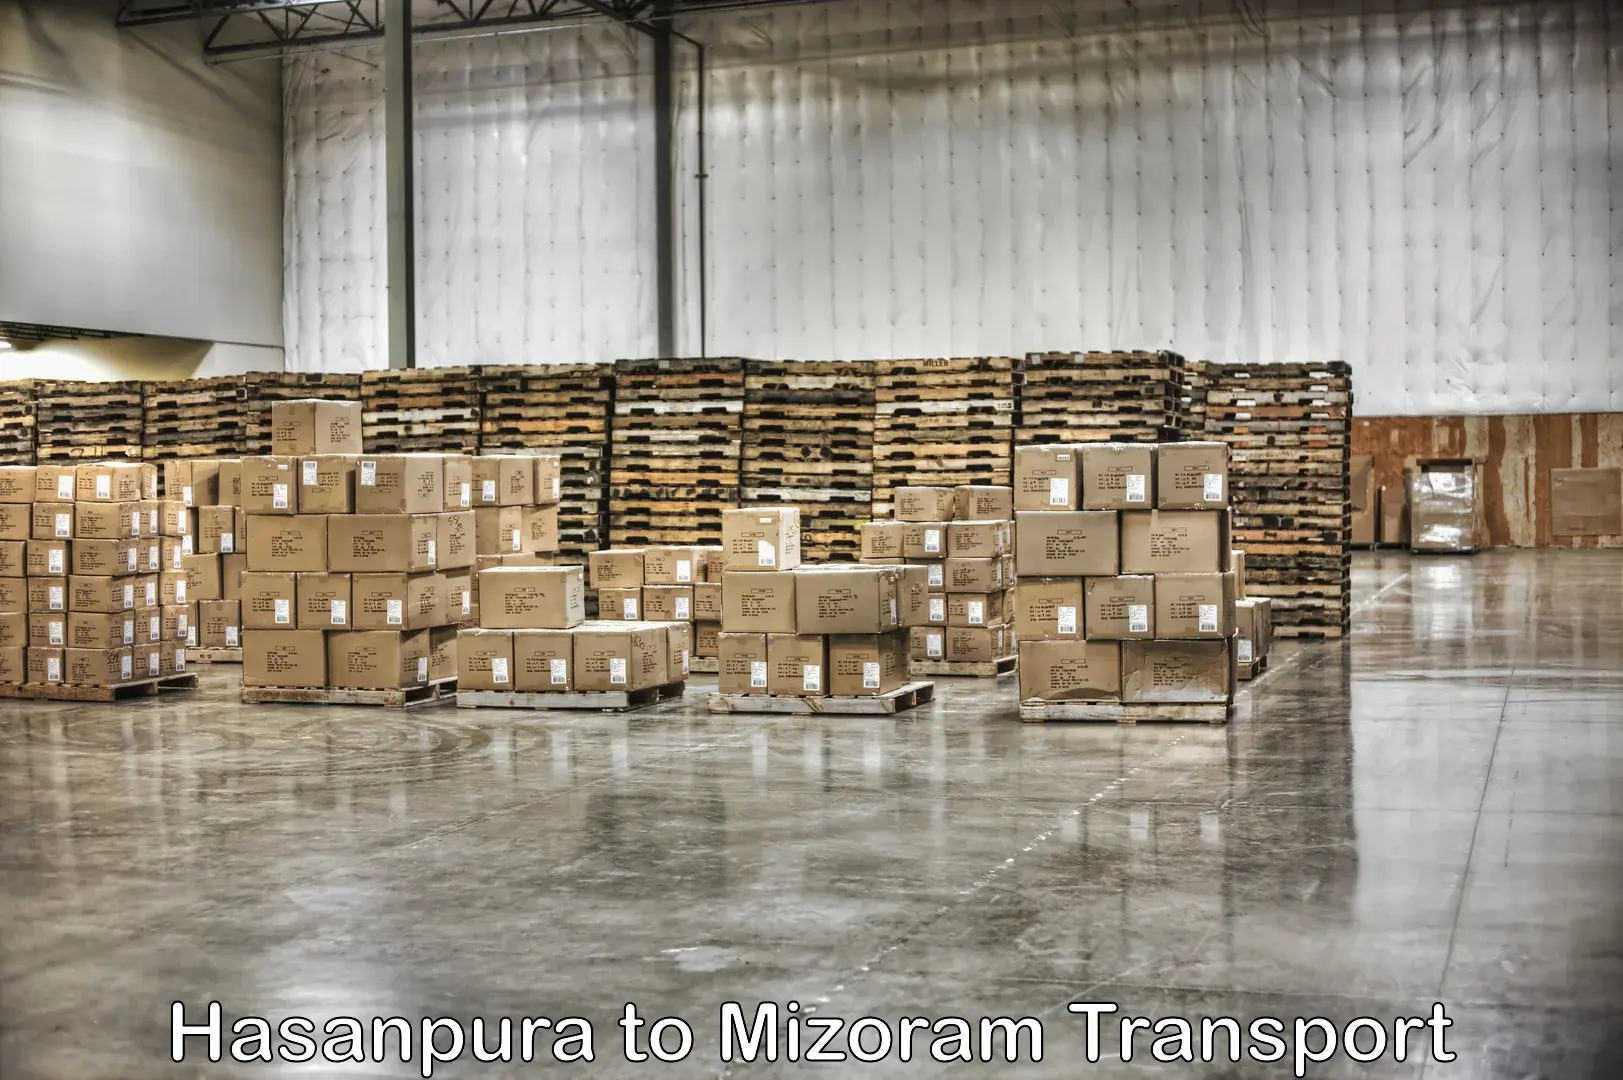 Daily parcel service transport in Hasanpura to Mizoram